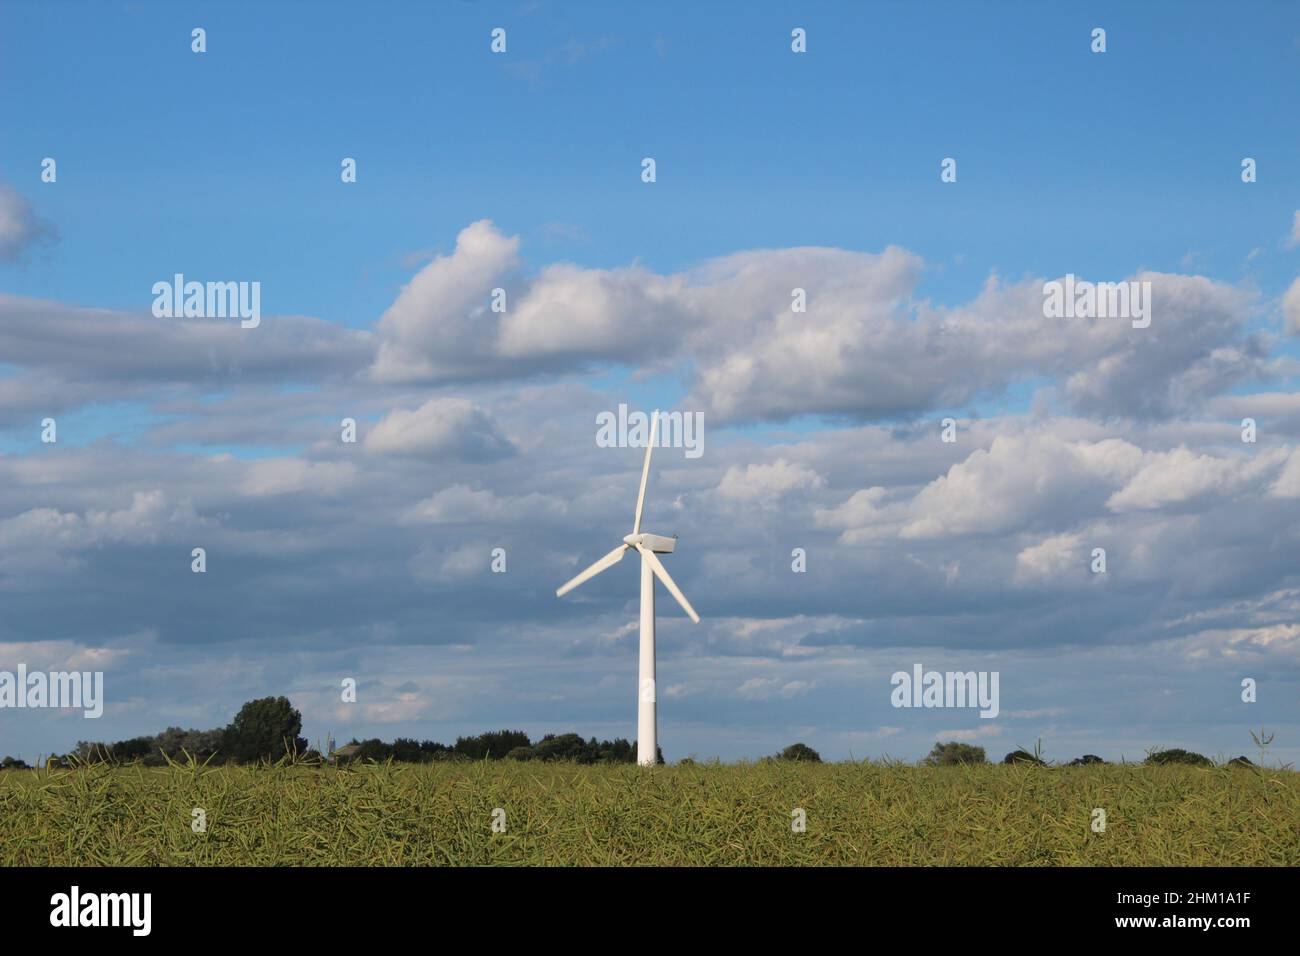 A wind turbine producing clean sustainable electricity in a field against  a blue cloudy sky Stock Photo